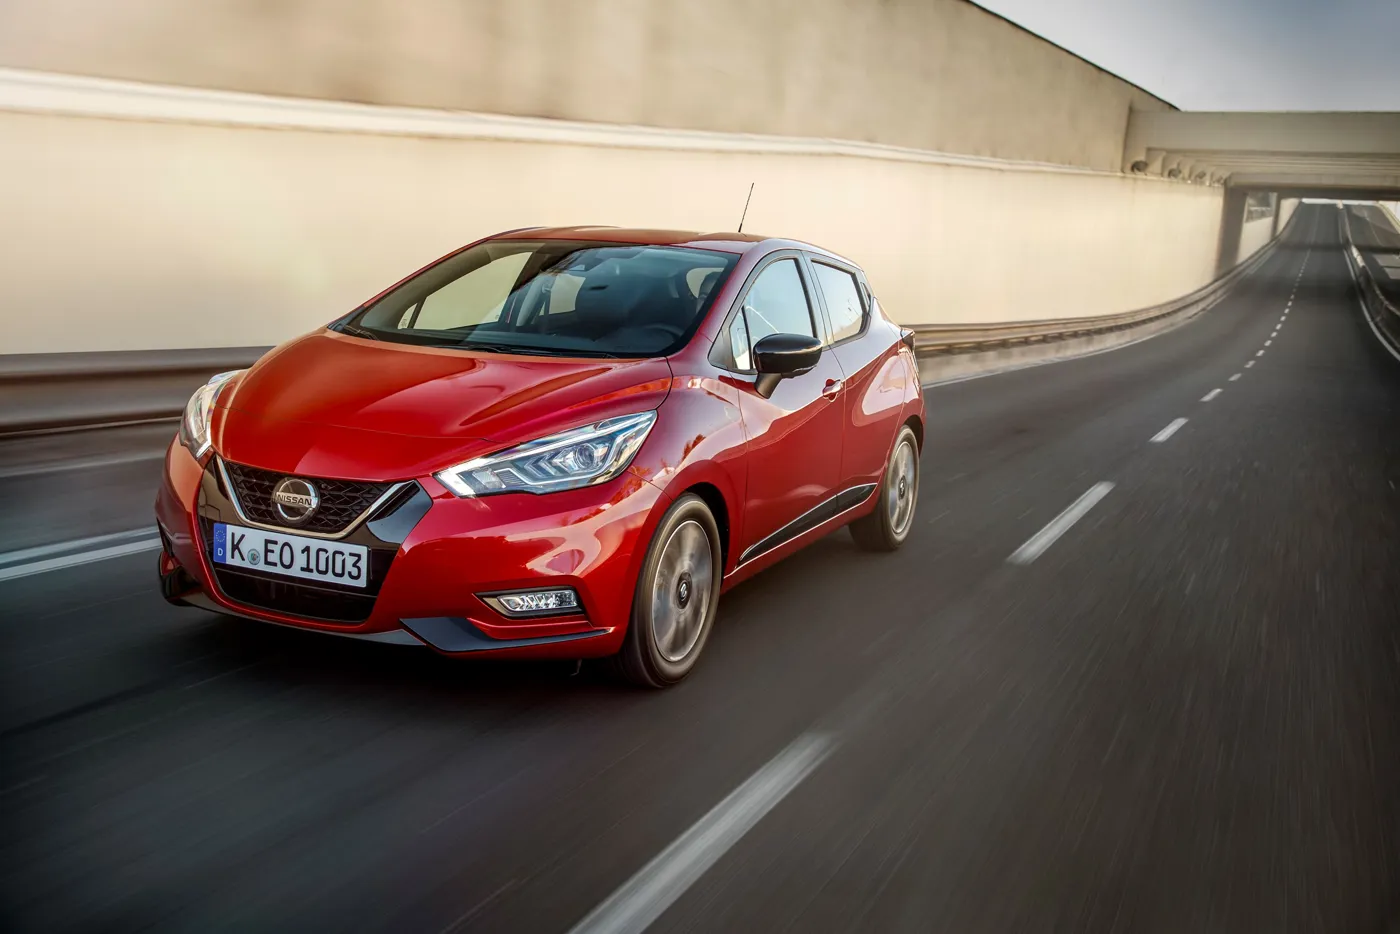 https://cdn-images.fleetnews.co.uk/thumbs/1400x1000/web-clean/1/nissan-micra-2019-first-drive/more-micra-live-event-red-micra-xtronic-dynamic-front-1.jpg